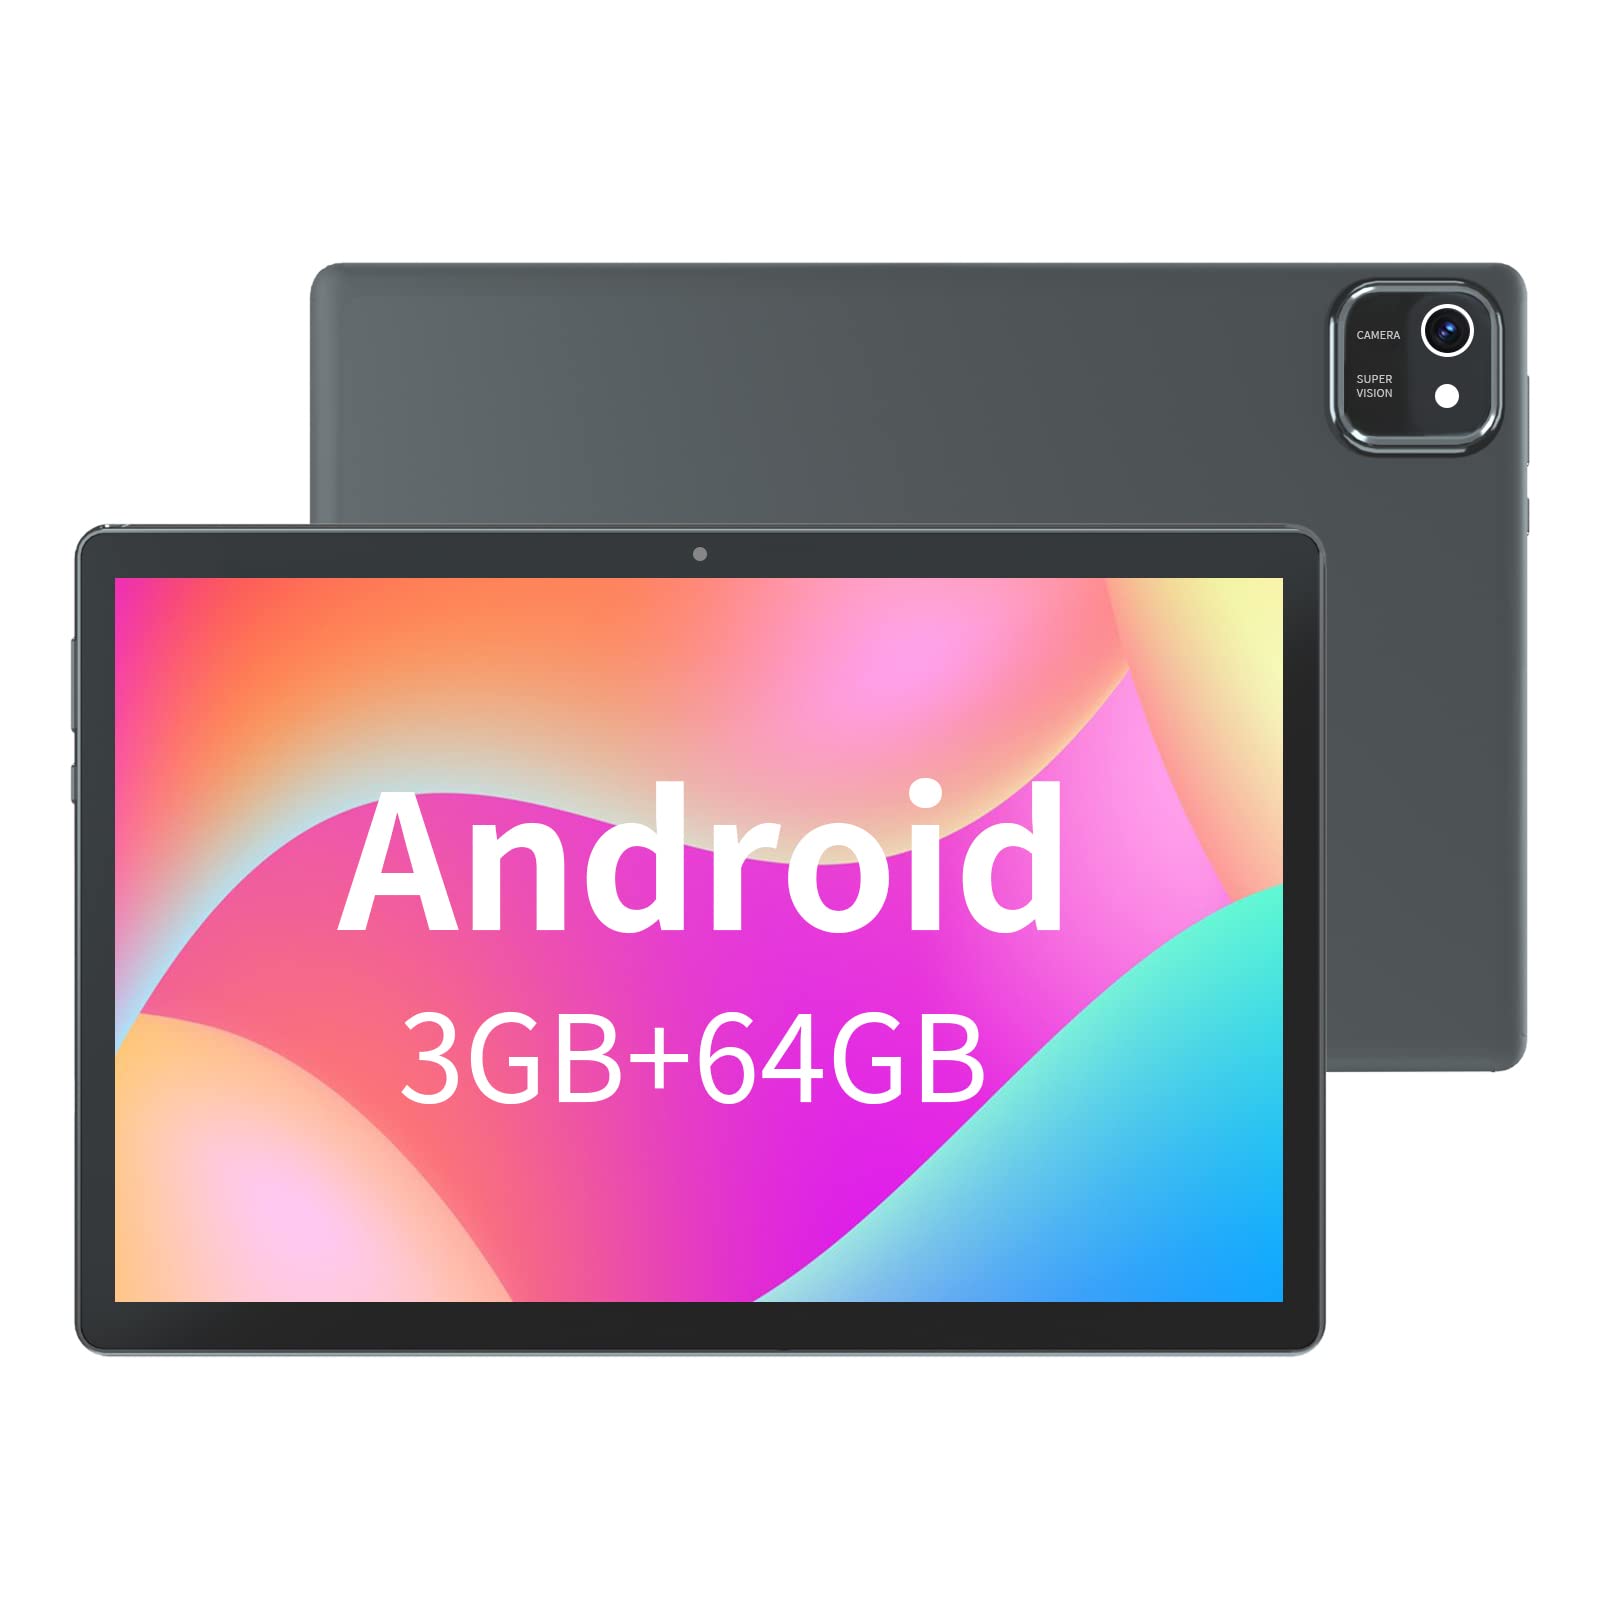 Android 11 Tablet 10inch Phablet, Large Storage 64GB Tablets Dual Stereo Speakers 512GB Expand, Octa-core Processor 3GB RAM 6000mAh Big Battery 10.1'' IPS HD Screen Google Tableta Tab(Black)